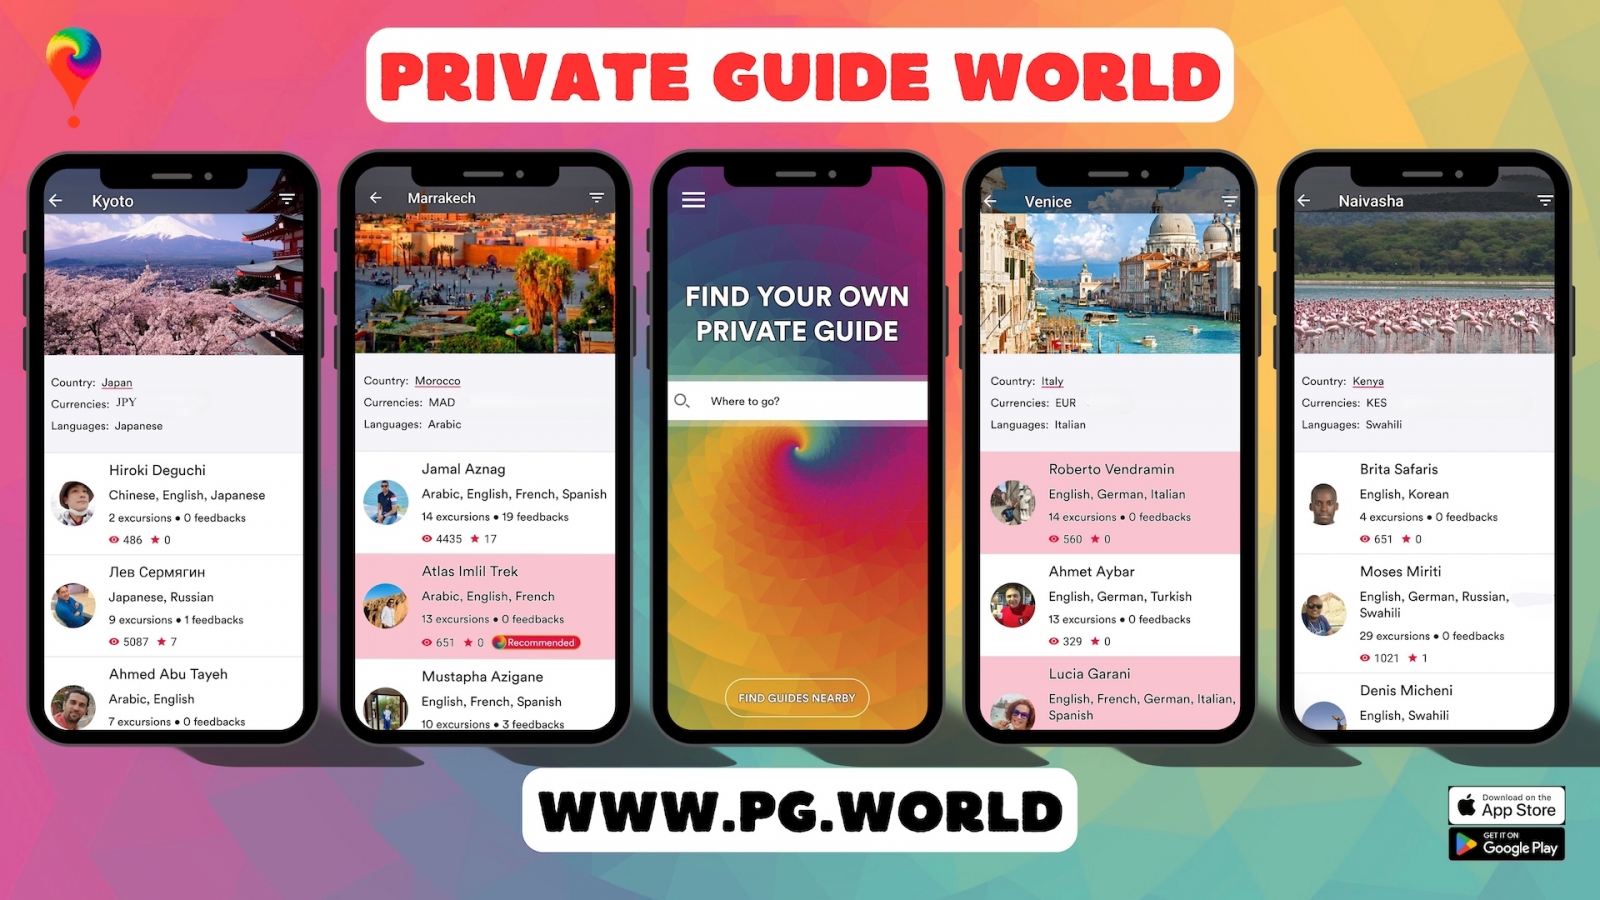 How Does the Private Tour Guide World Built-In Messenger Work?